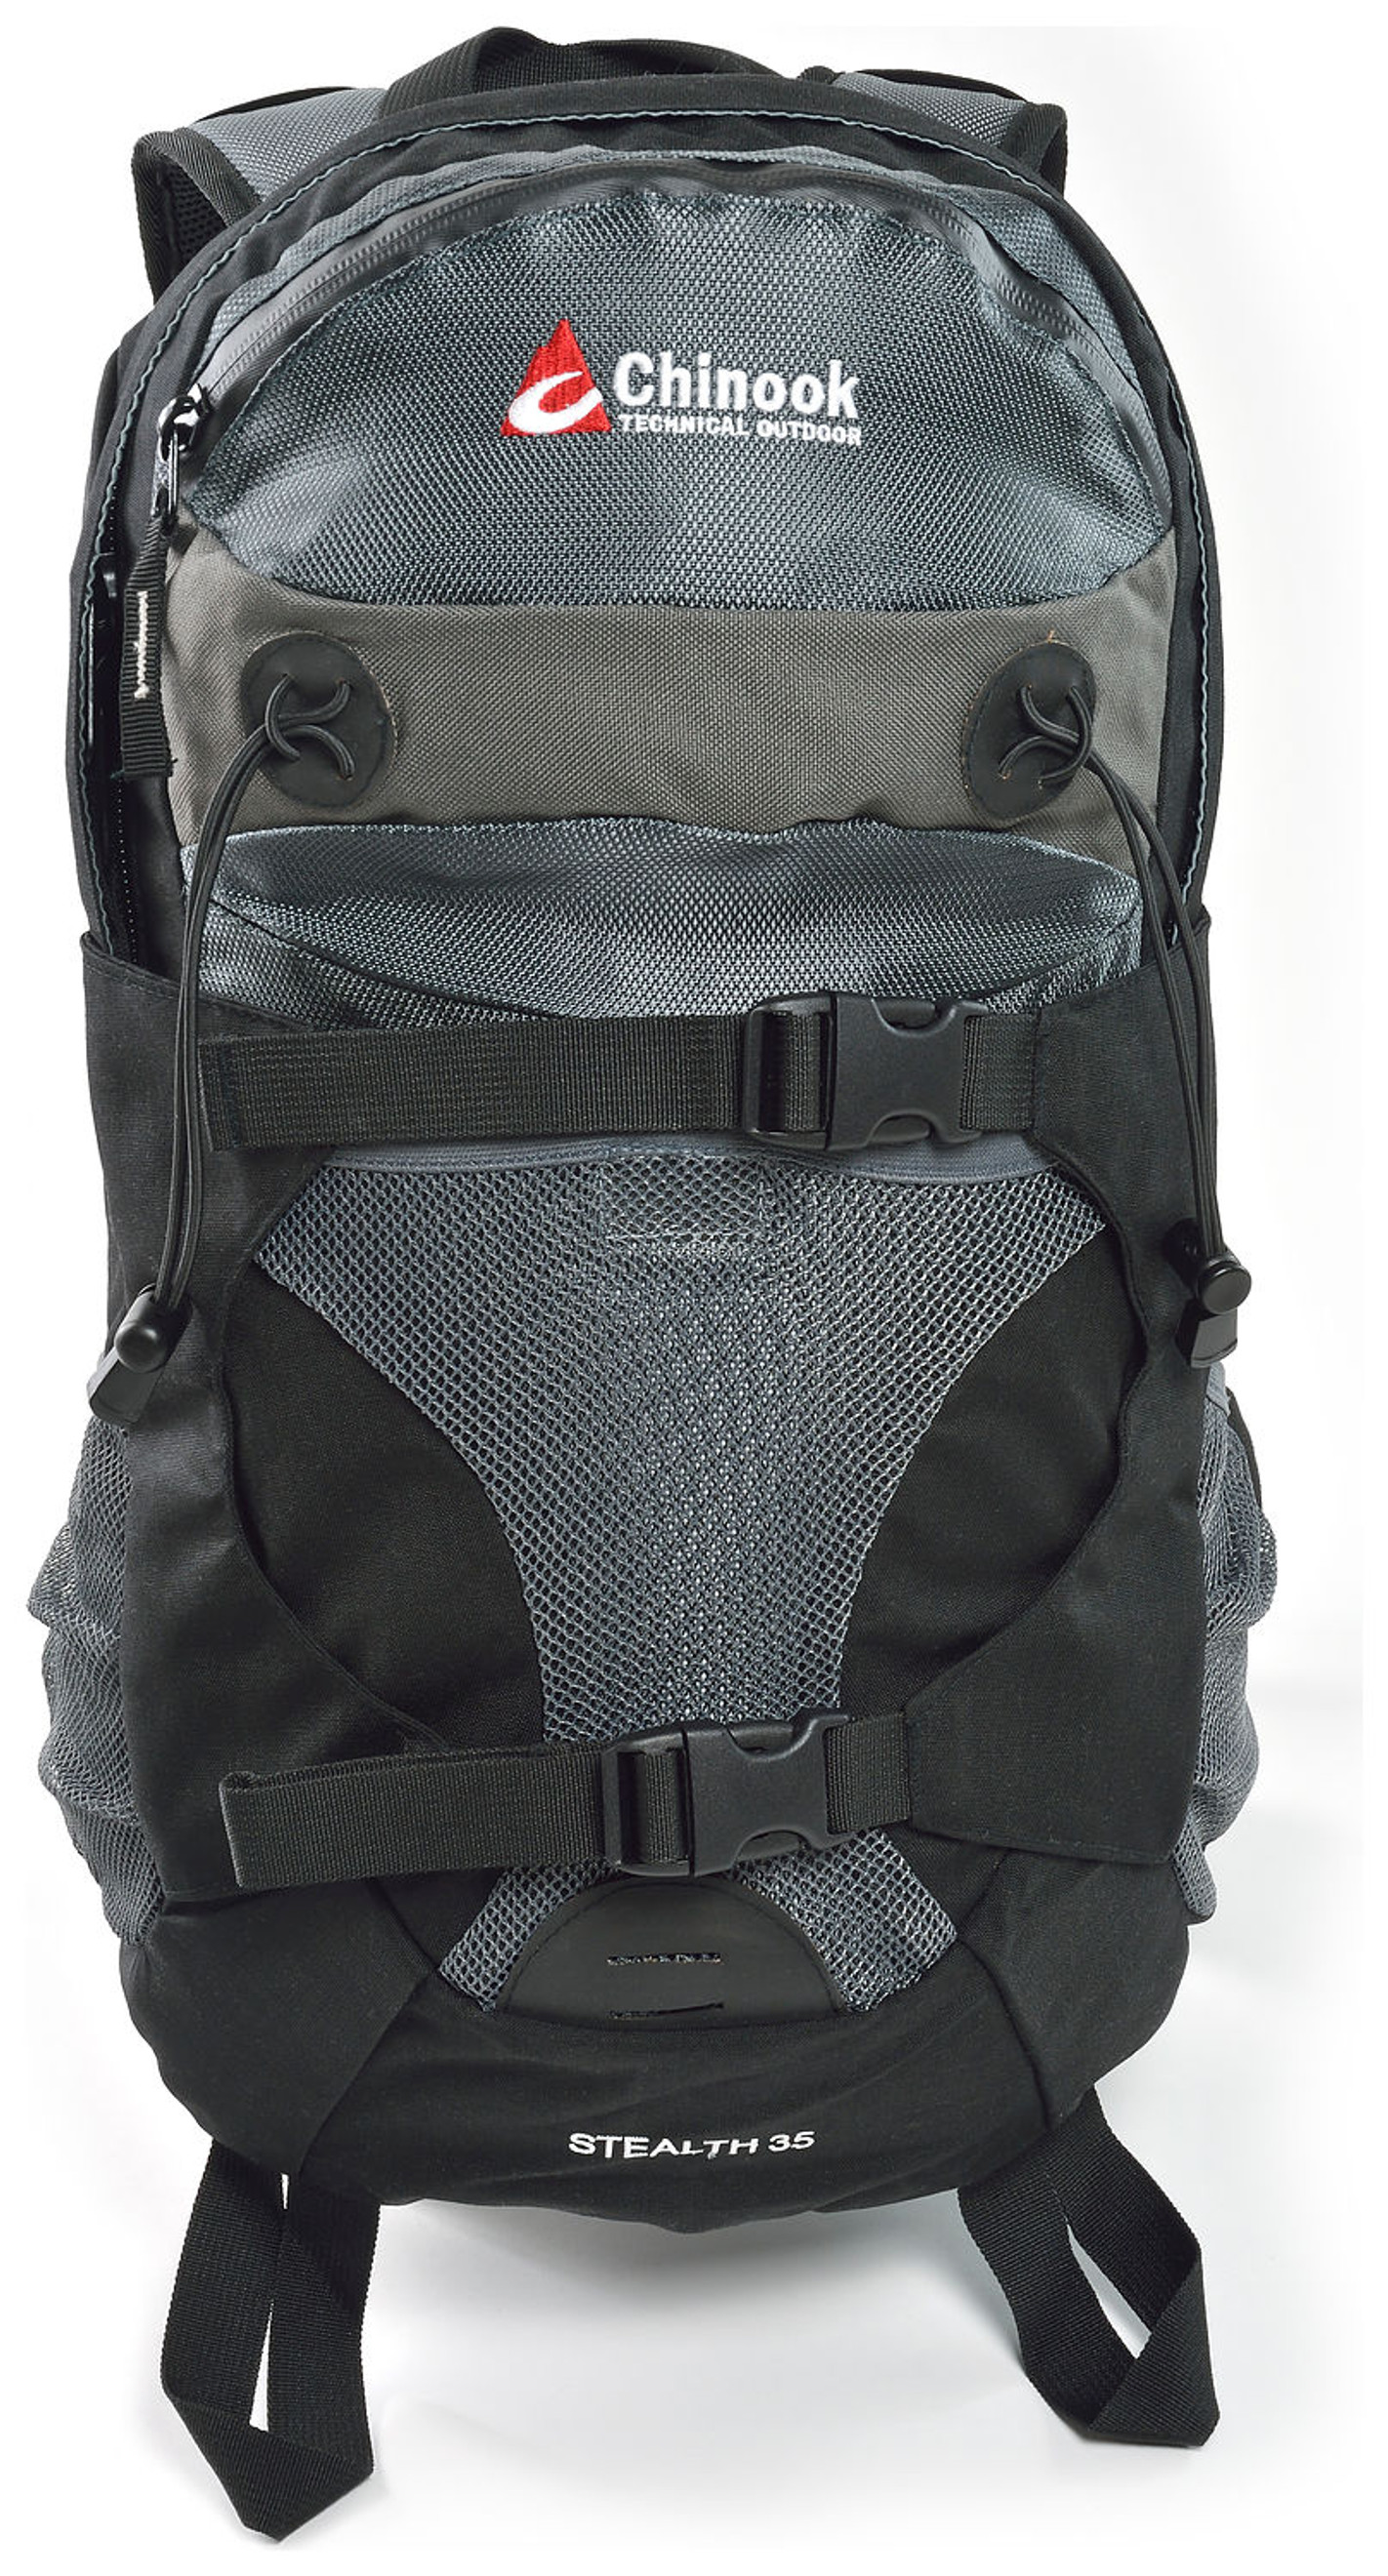 Chinook Stealth 35 Technical Daypack